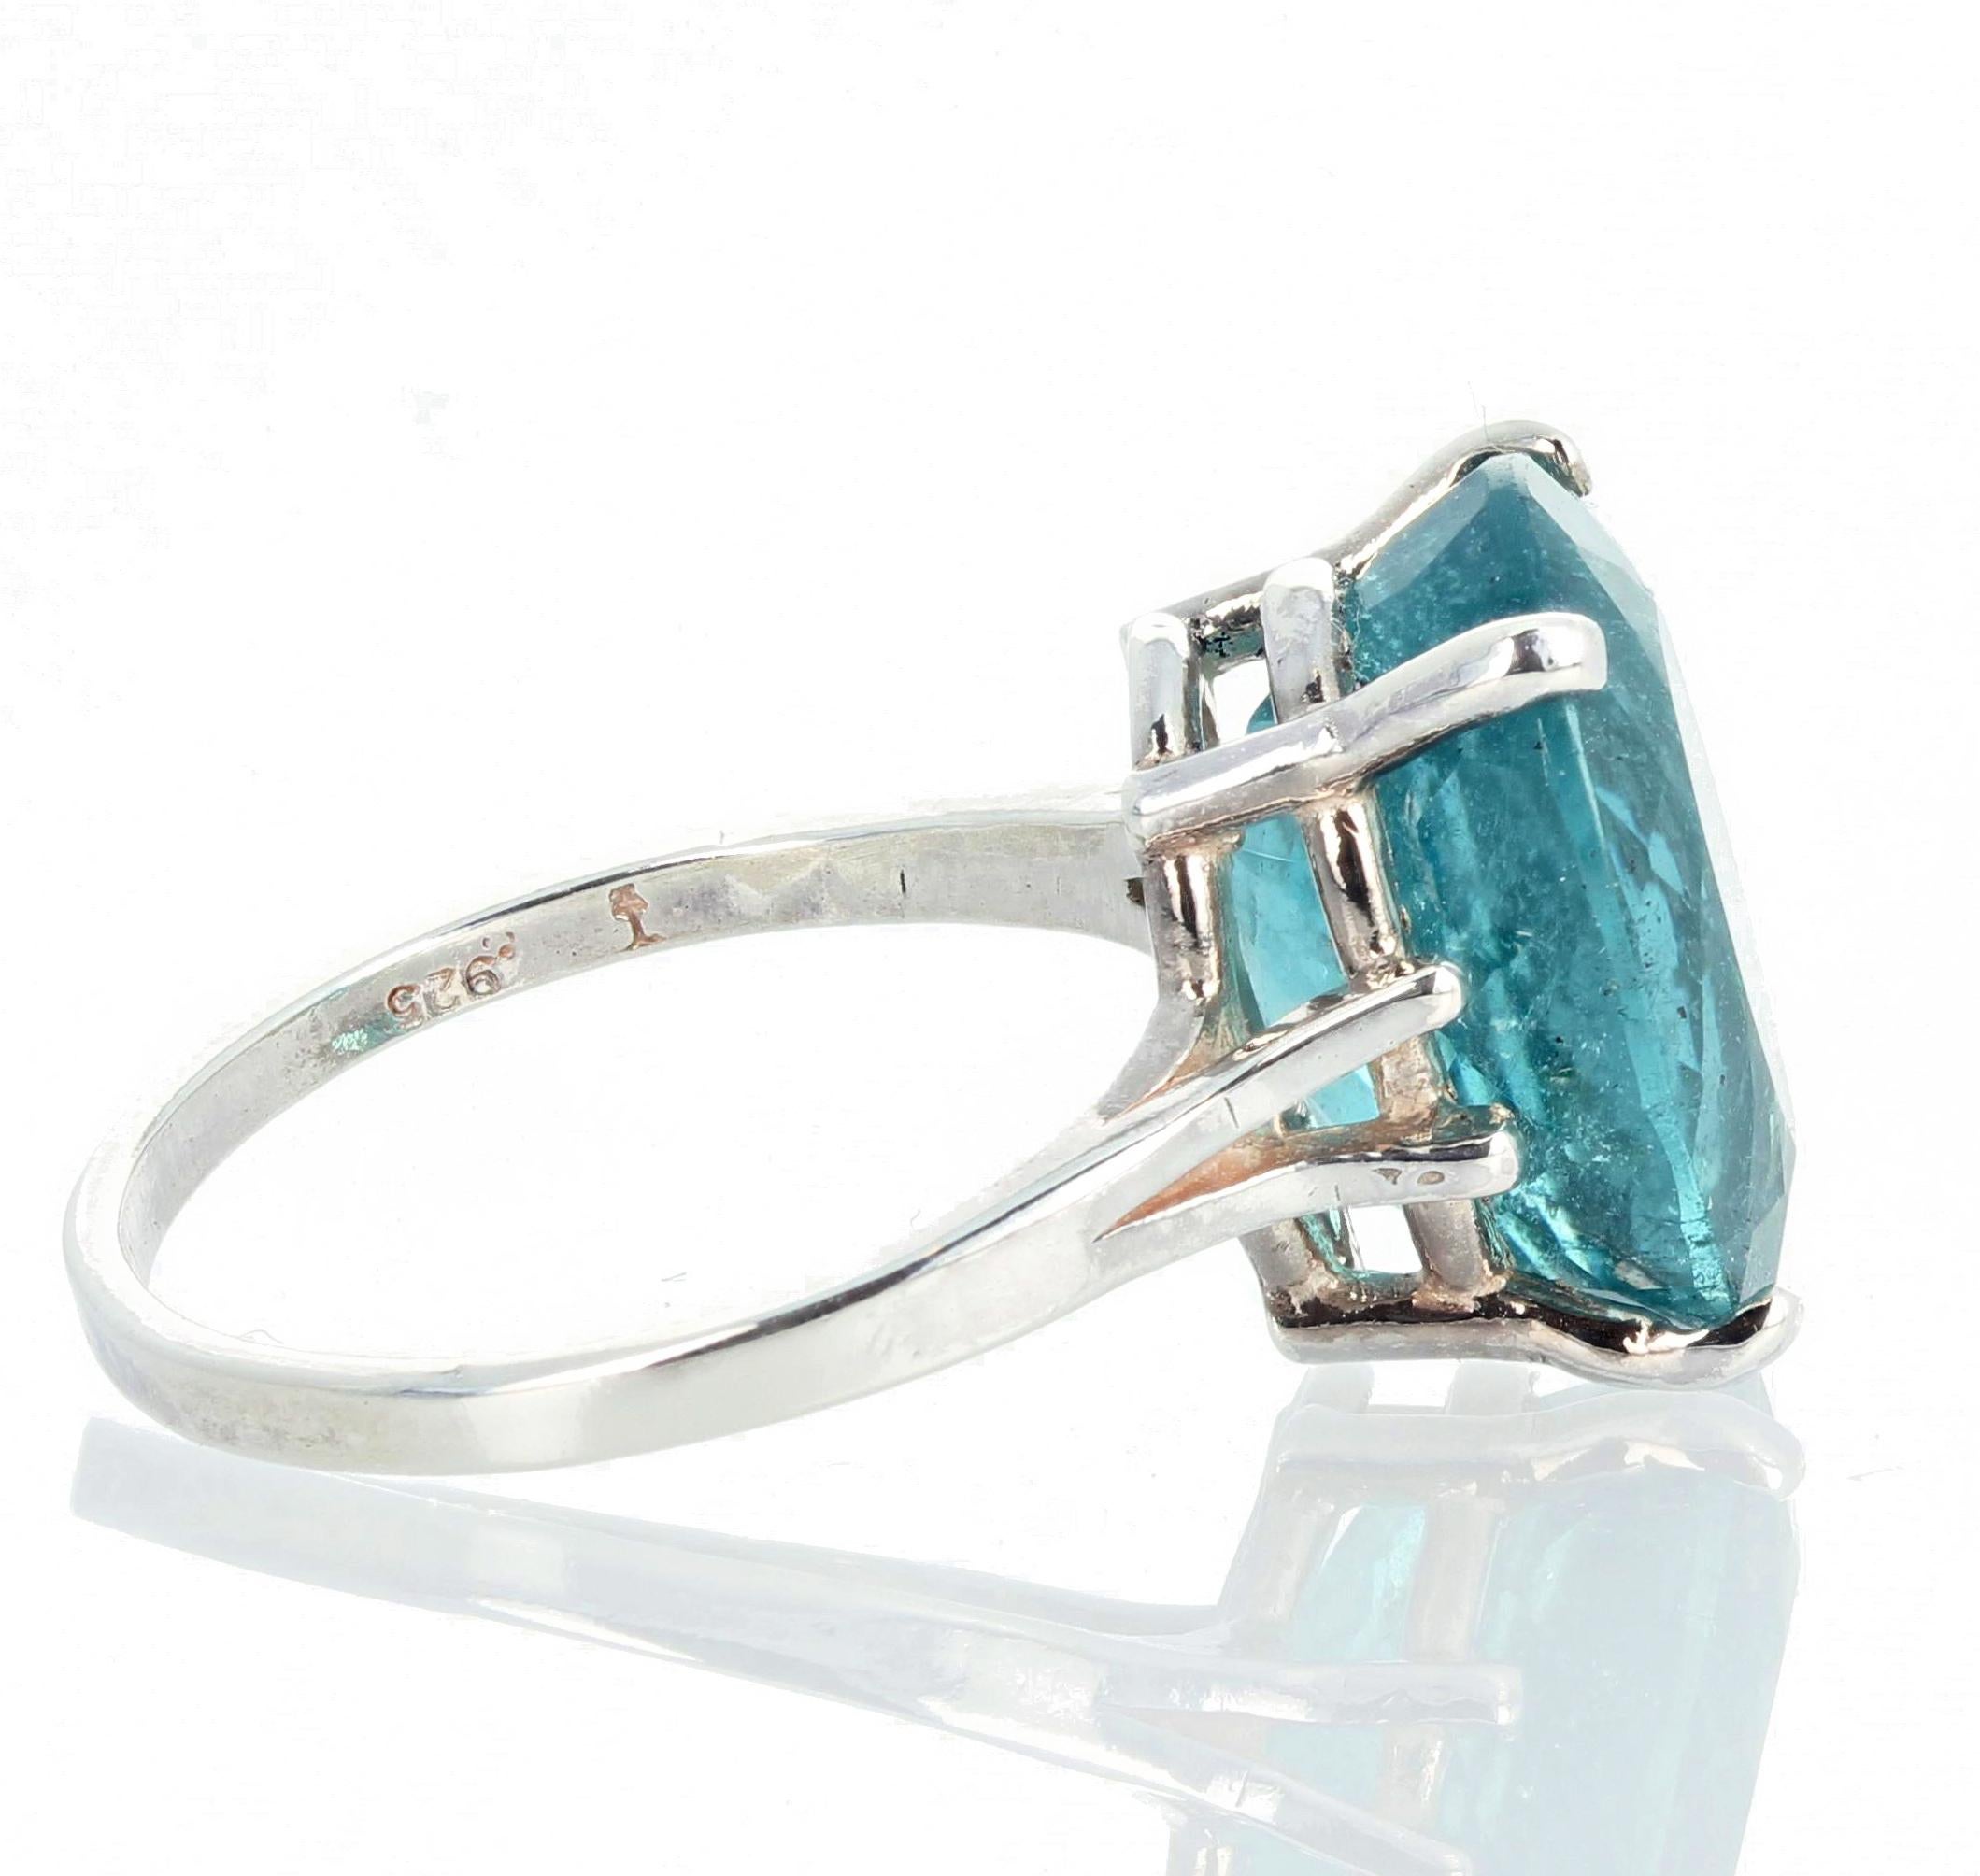 Gemjunky Rare 7.9 Cts Blue Indicolite Tourmaline Sterling Silver Cocktail Ring 3